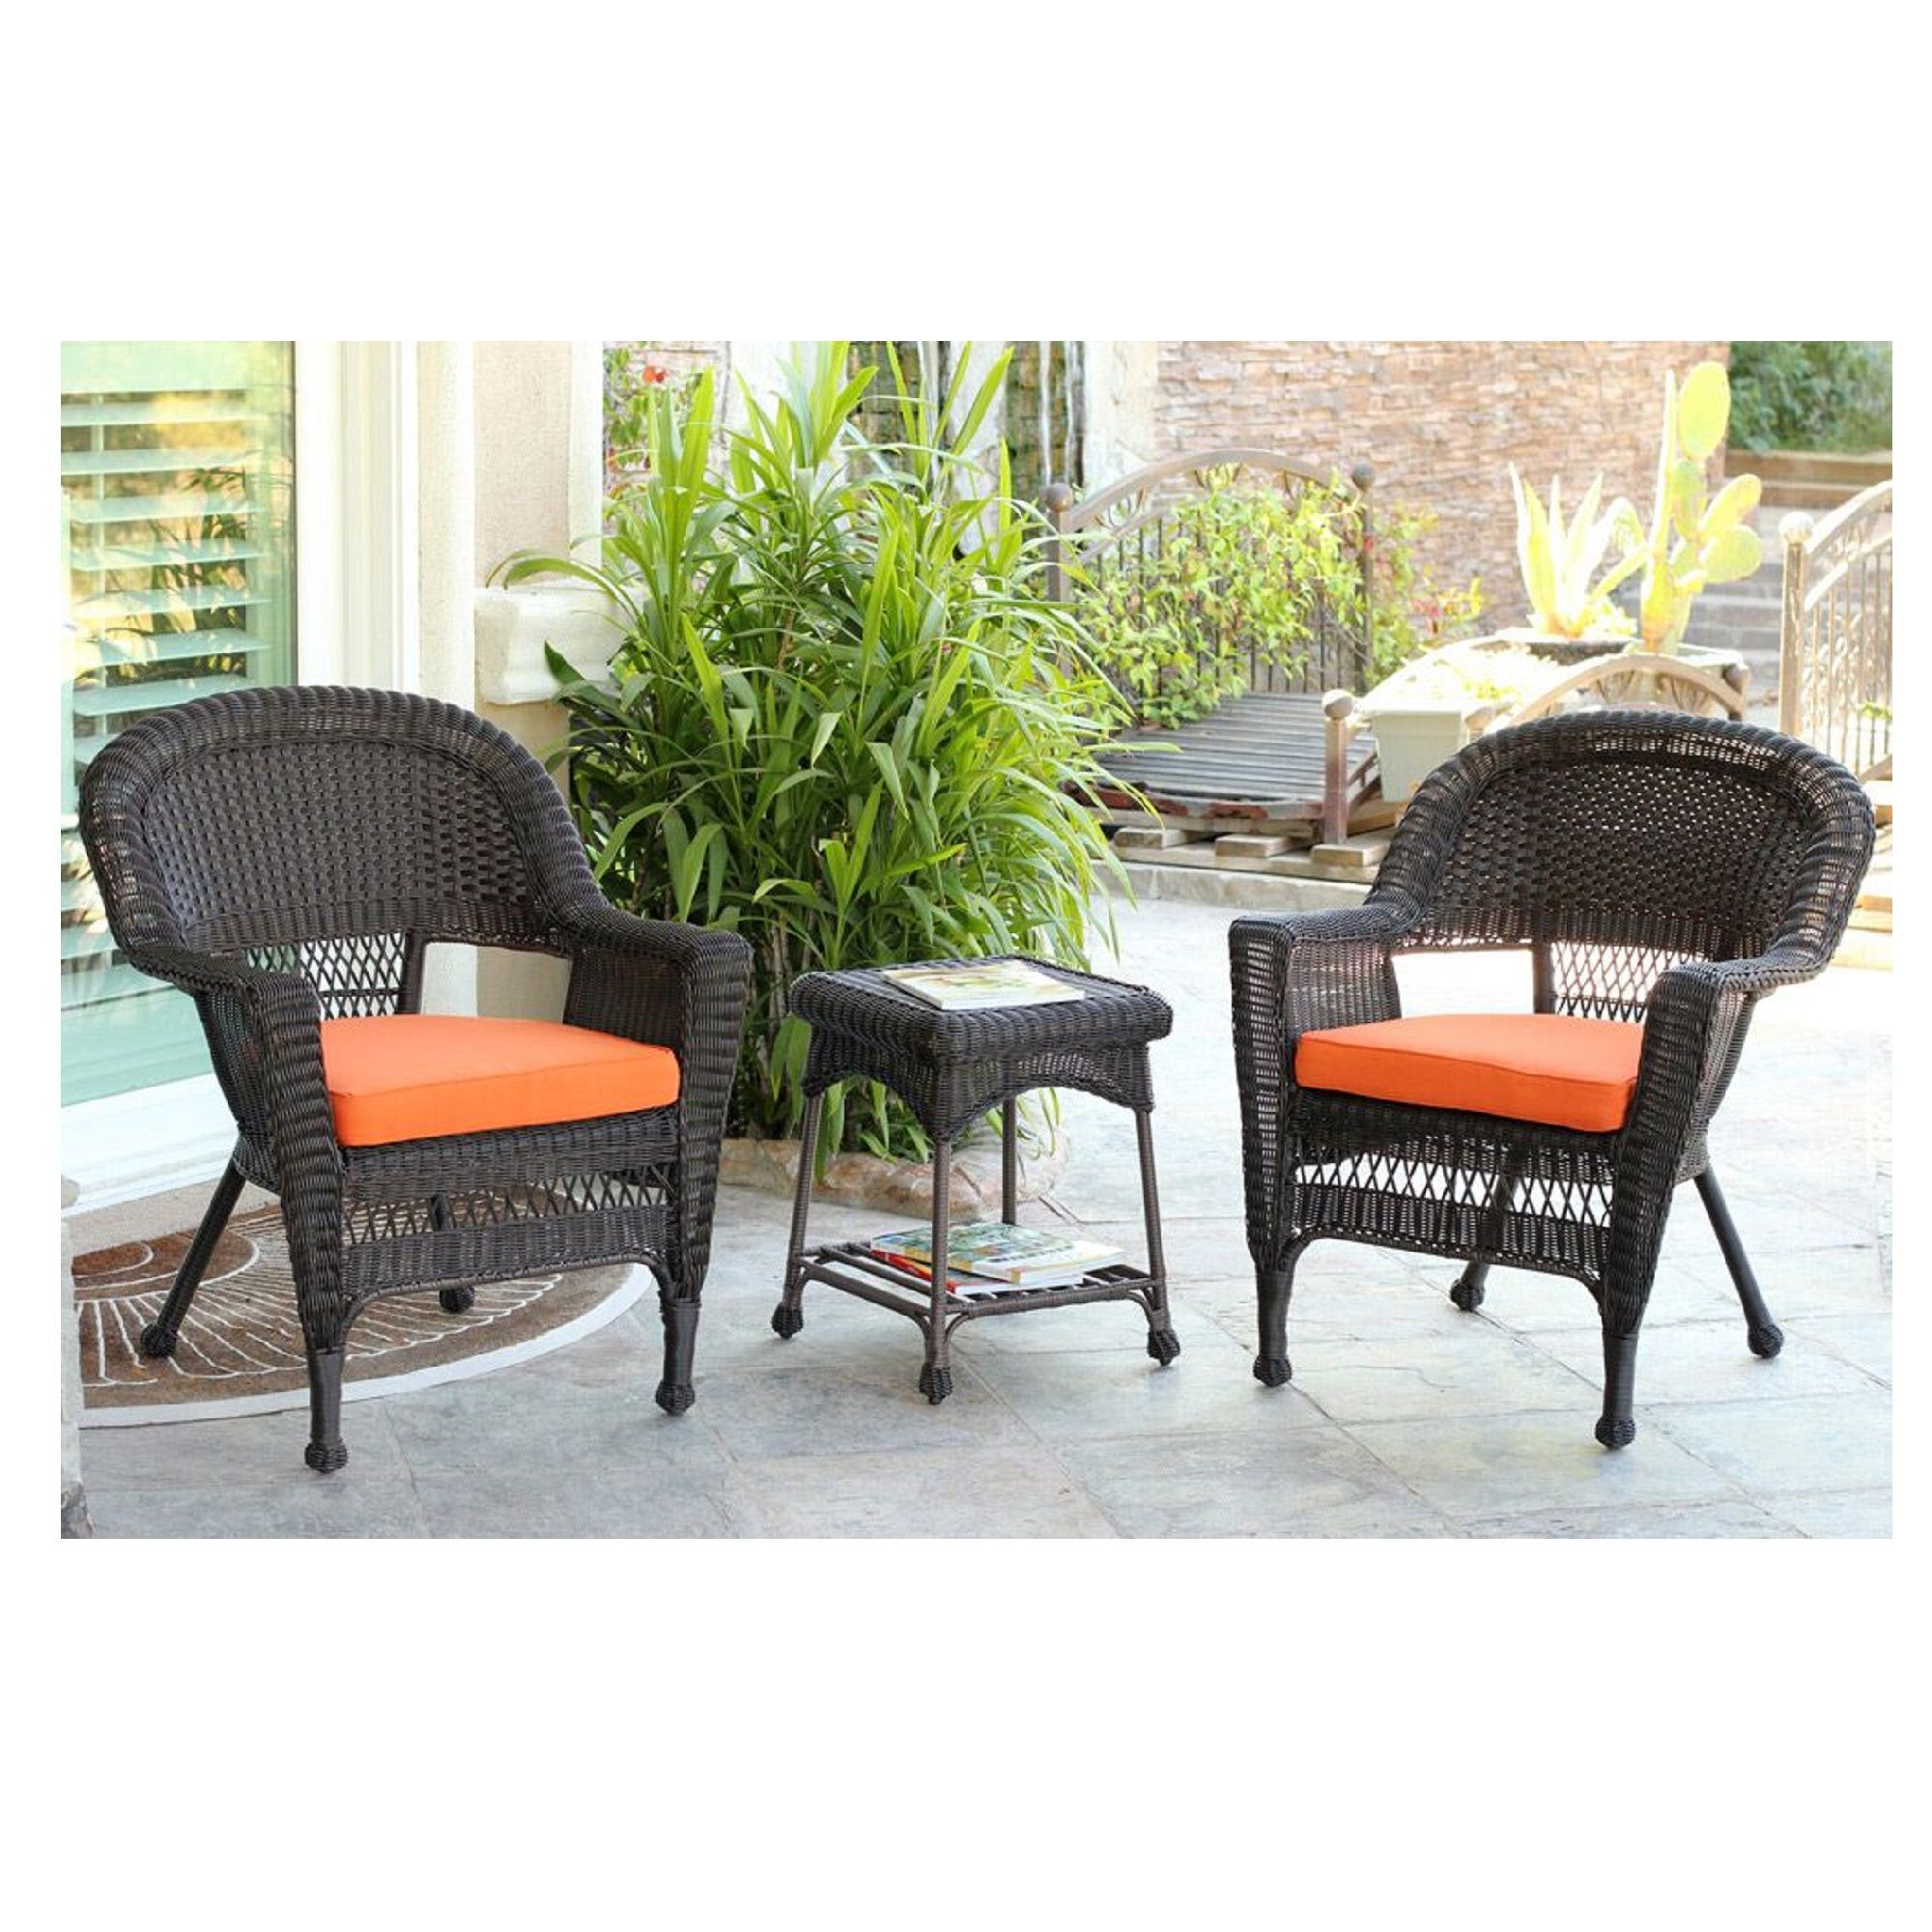 Set Of 3 Espresso Brown Resin Wicker Patio Chairs And End Table Intended For Most Recent Outdoor Wicker Orange Cushion Patio Sets (View 12 of 15)